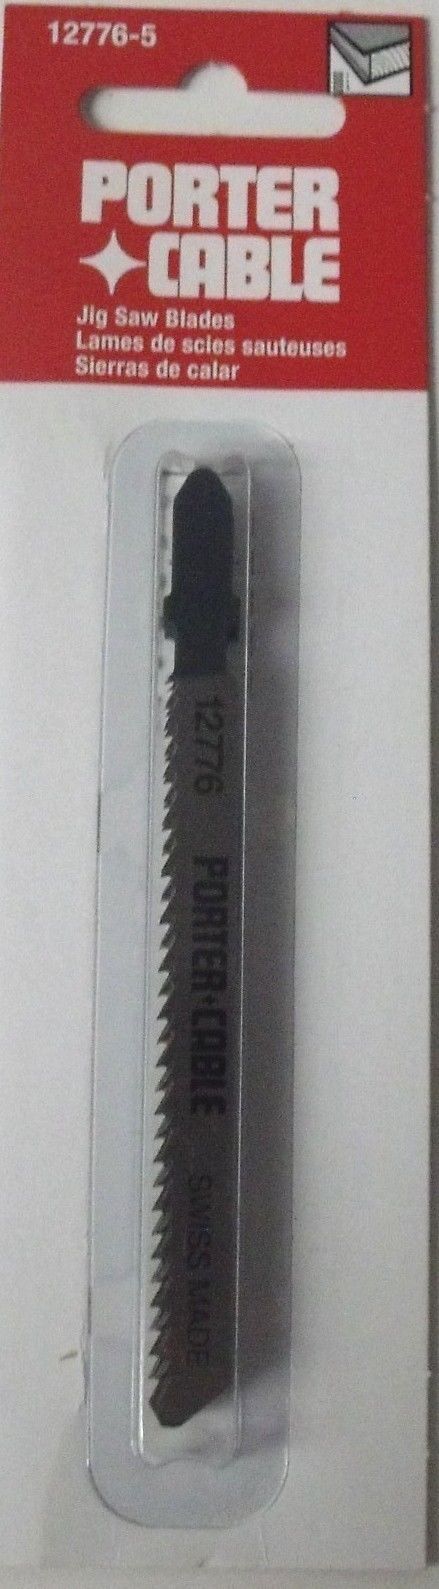 Porter Cable 12776-5 T-Shank Jig Saw Blades 10TPI 5pcs. 4" Long Down Cutting